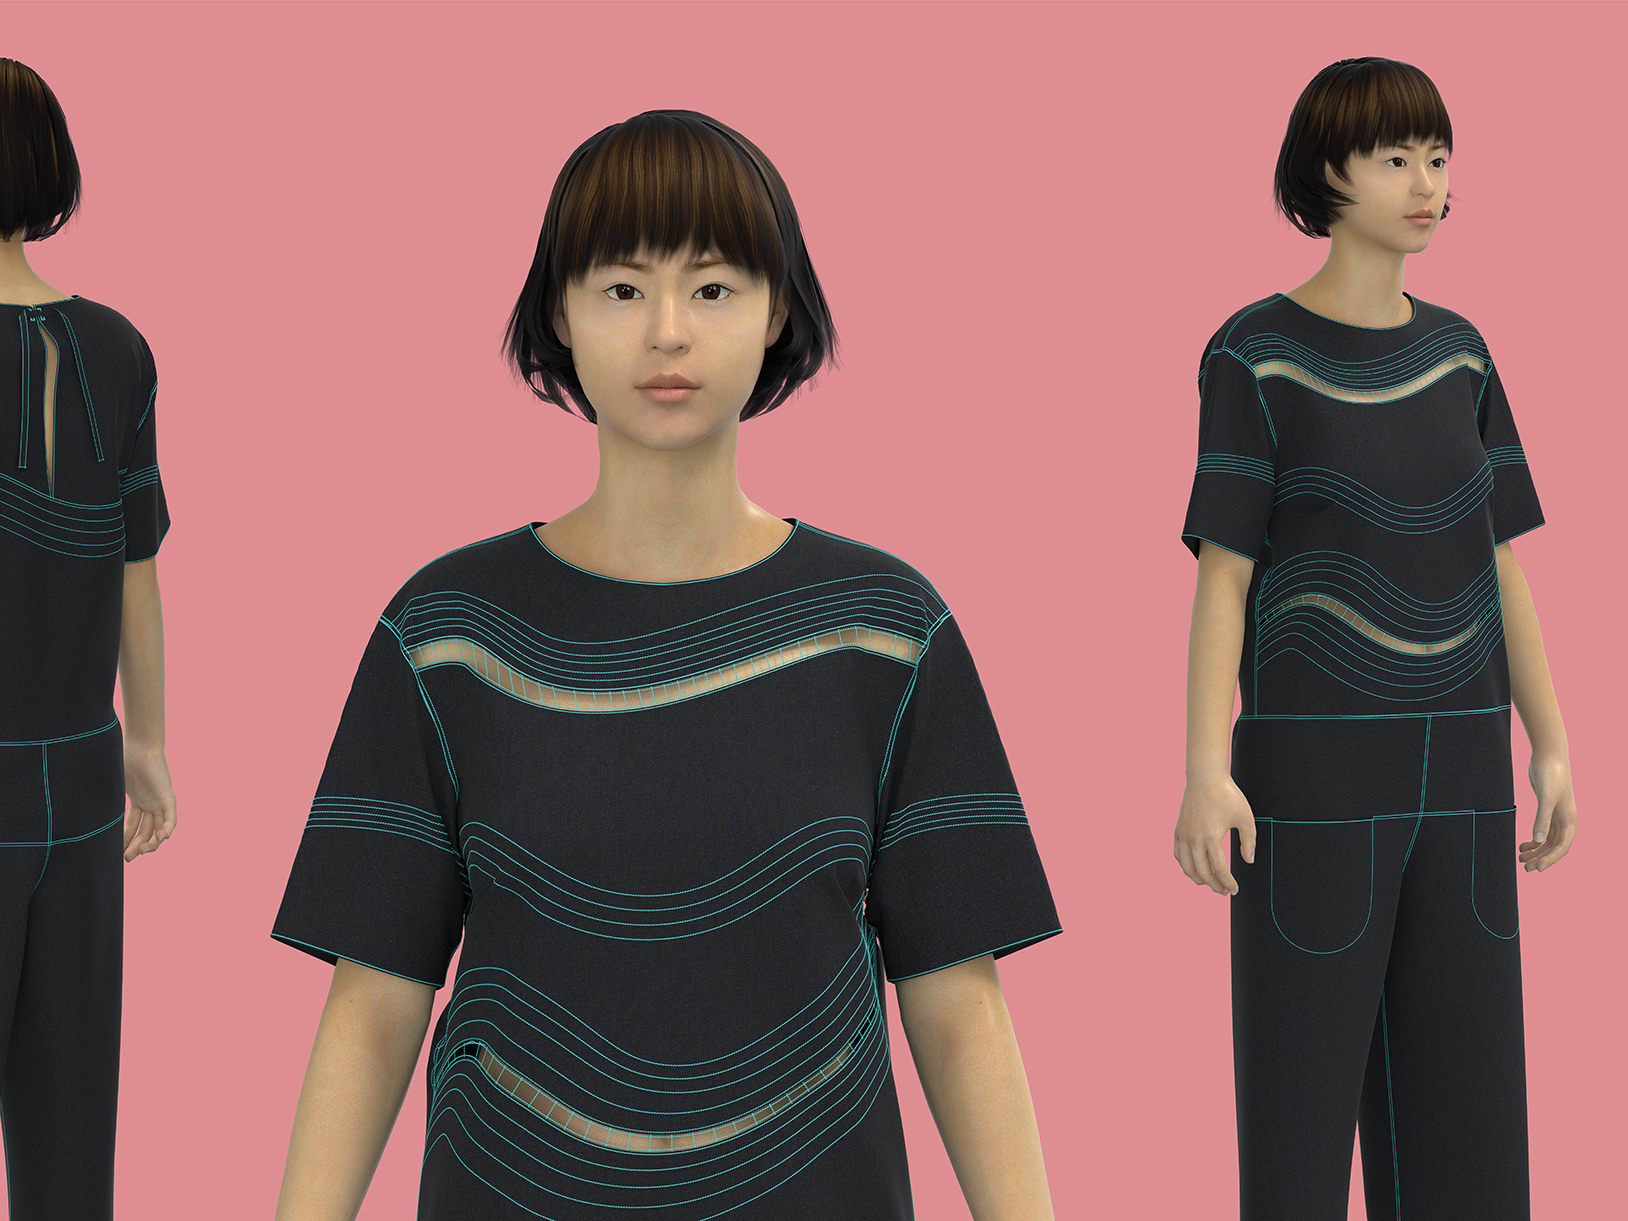 Digital model facing varying directions with pink background